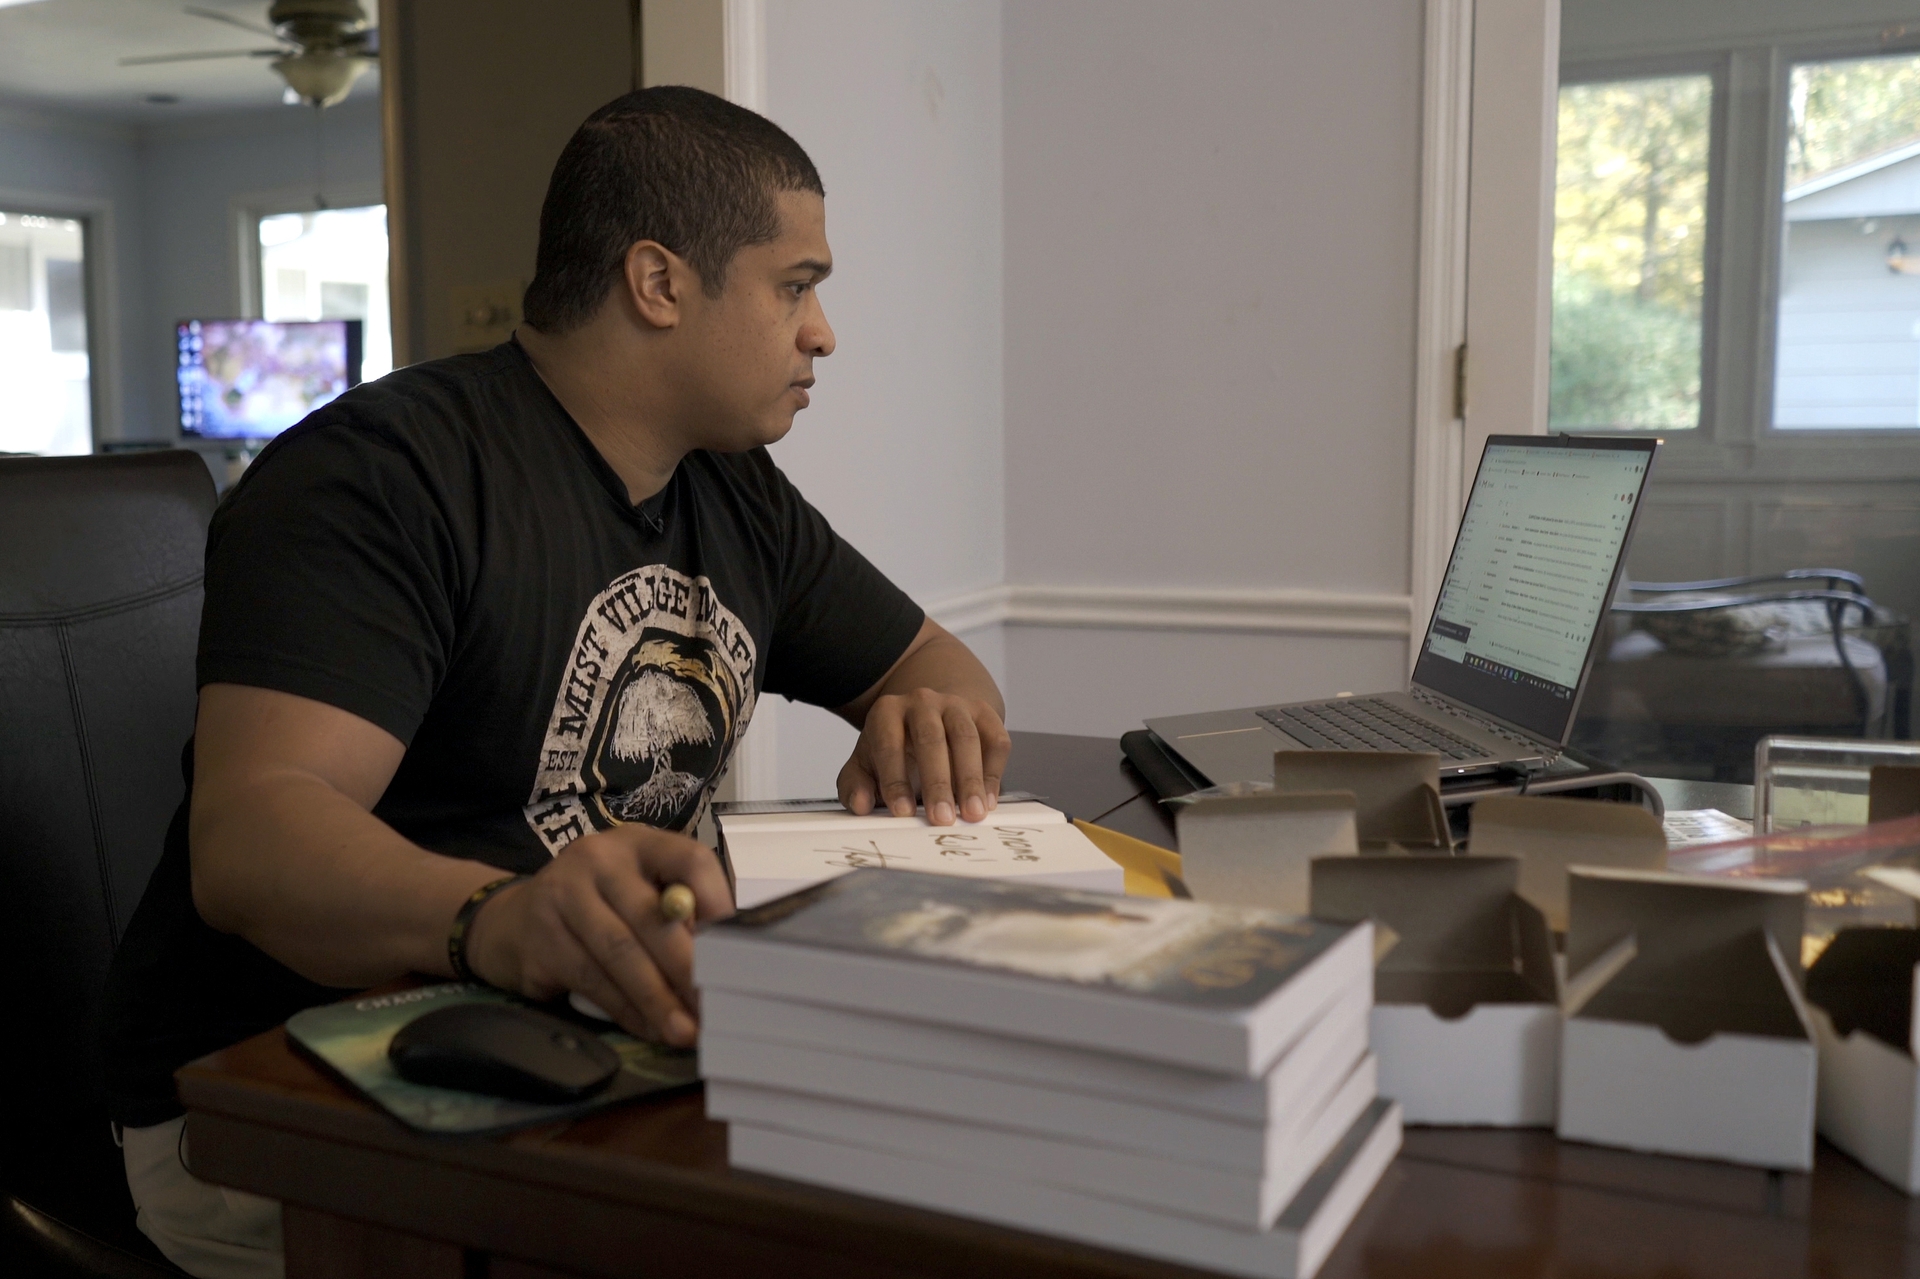 A man sits at a desk in front of a laptop computer. A book is open in front of him.  A stack of books is in the foreground of the image.